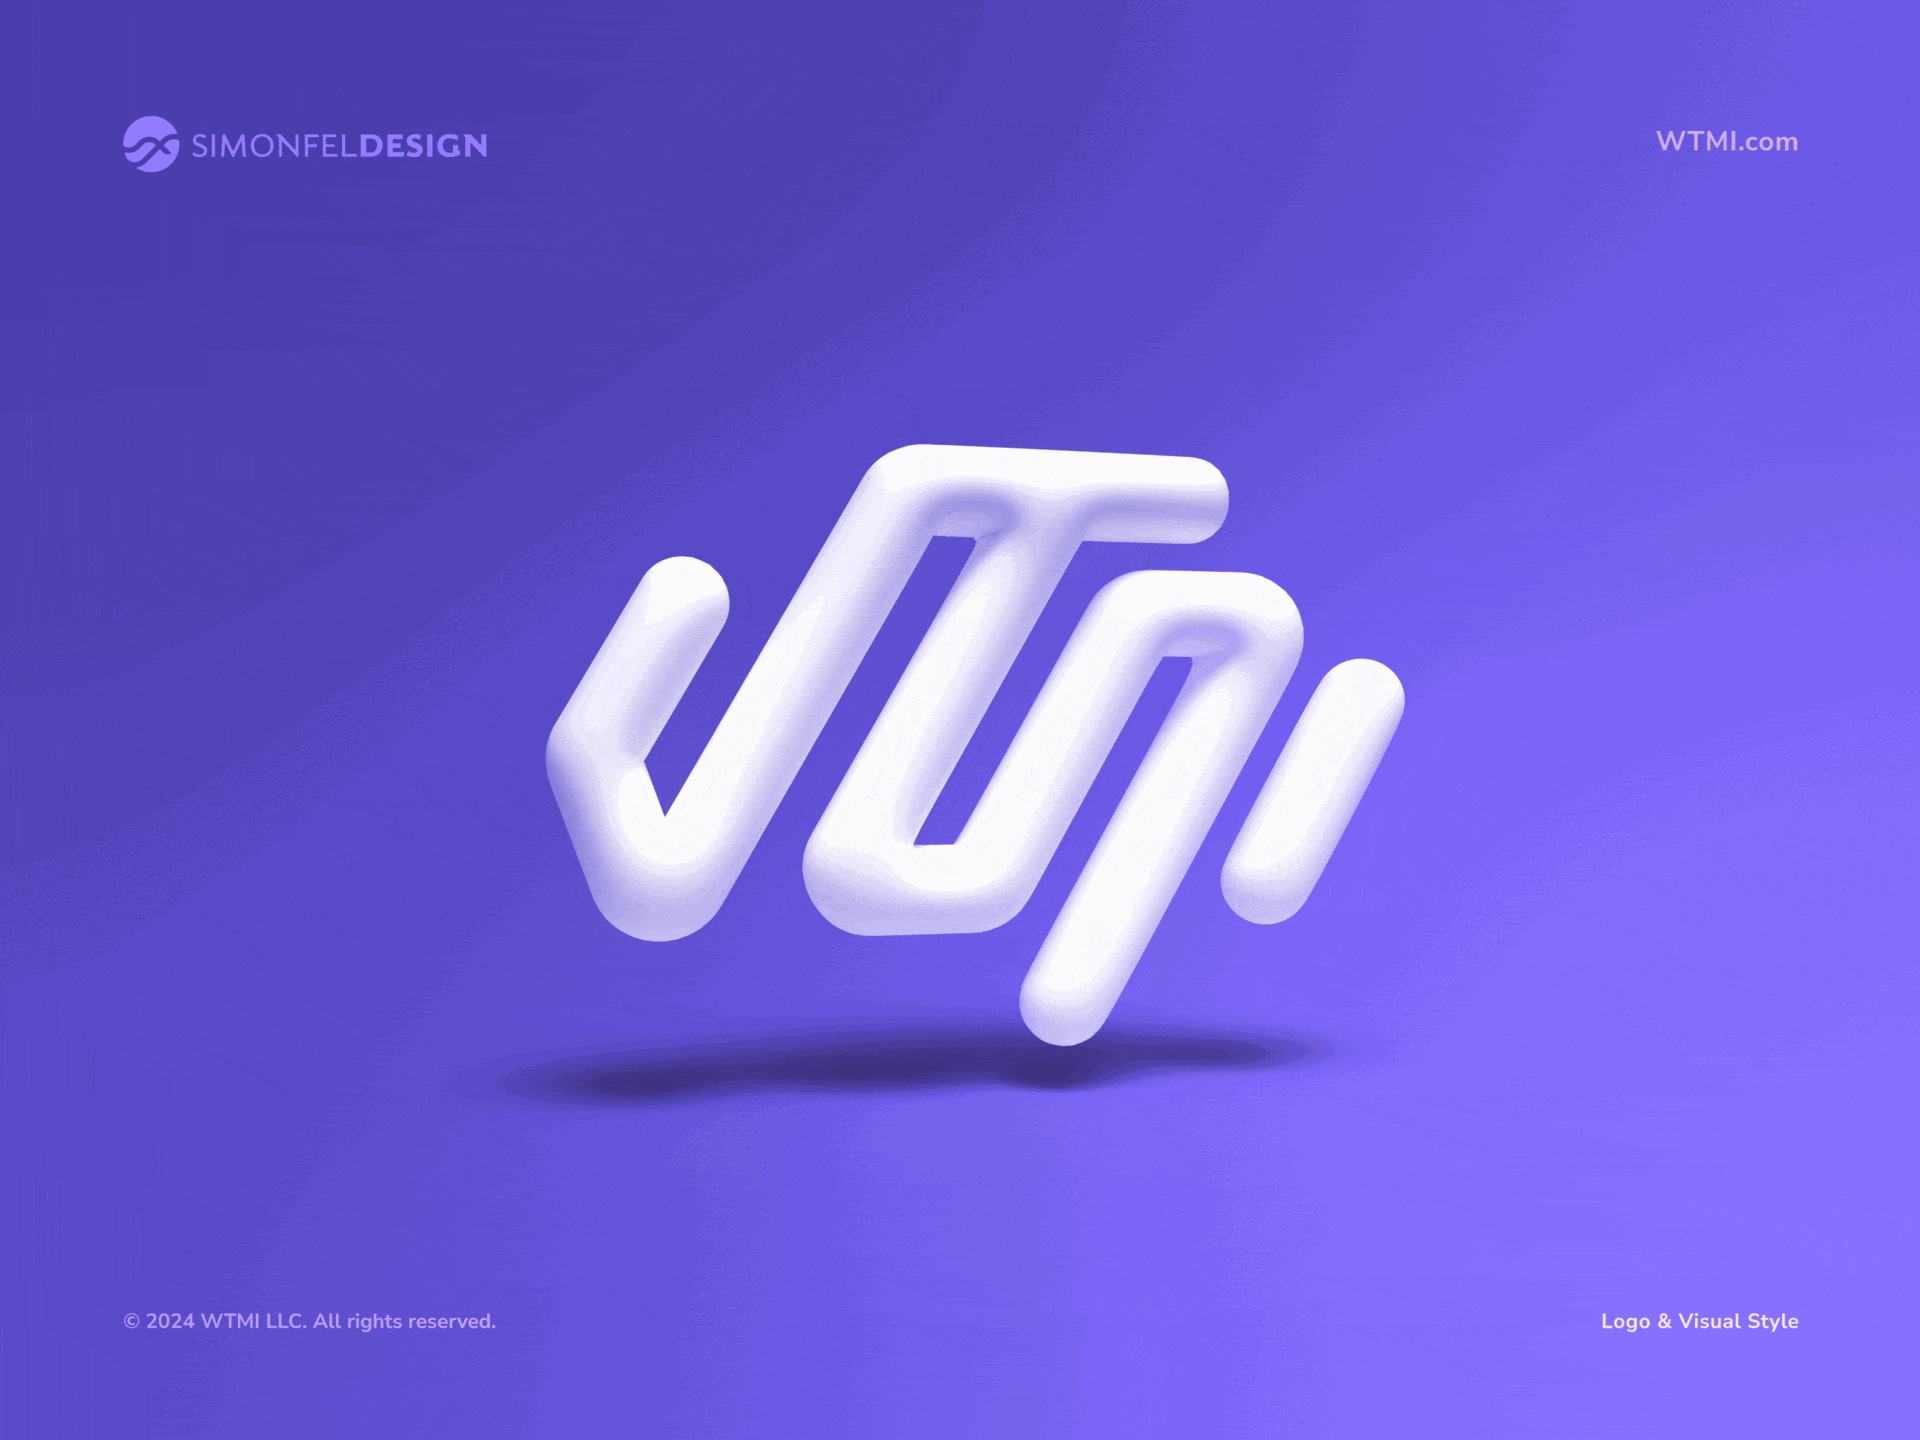 Logo & Visual Style for WTMI big data brain business cloud cognition customer experience data ecommerce iot mind path purple saas sales scalable software startup tech w wtmi